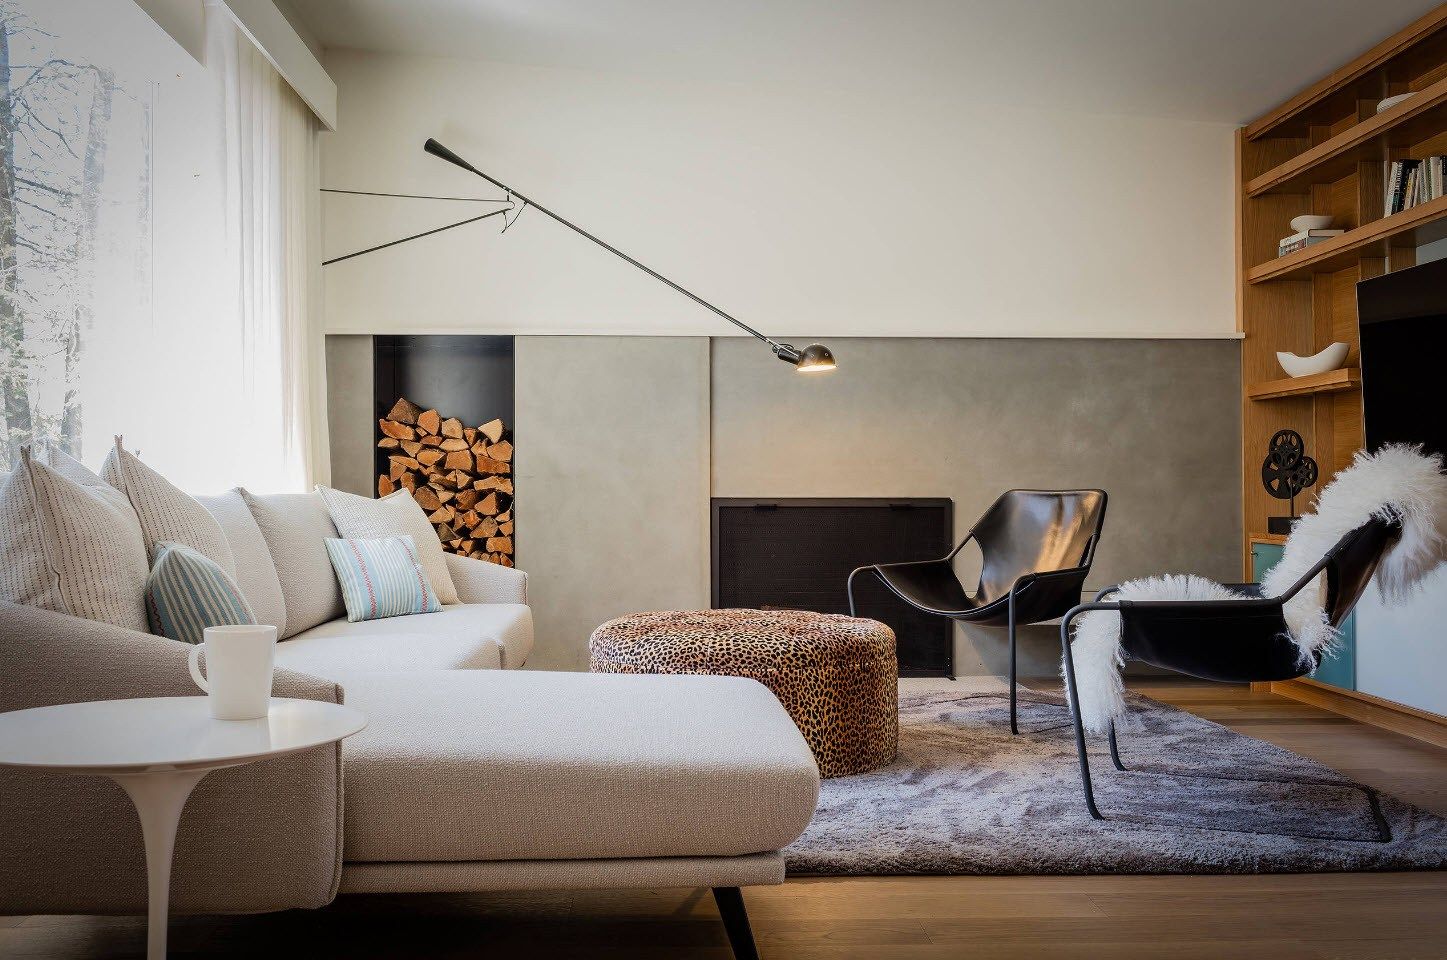 Firewood rack and round ottoman for the Scandi styled living